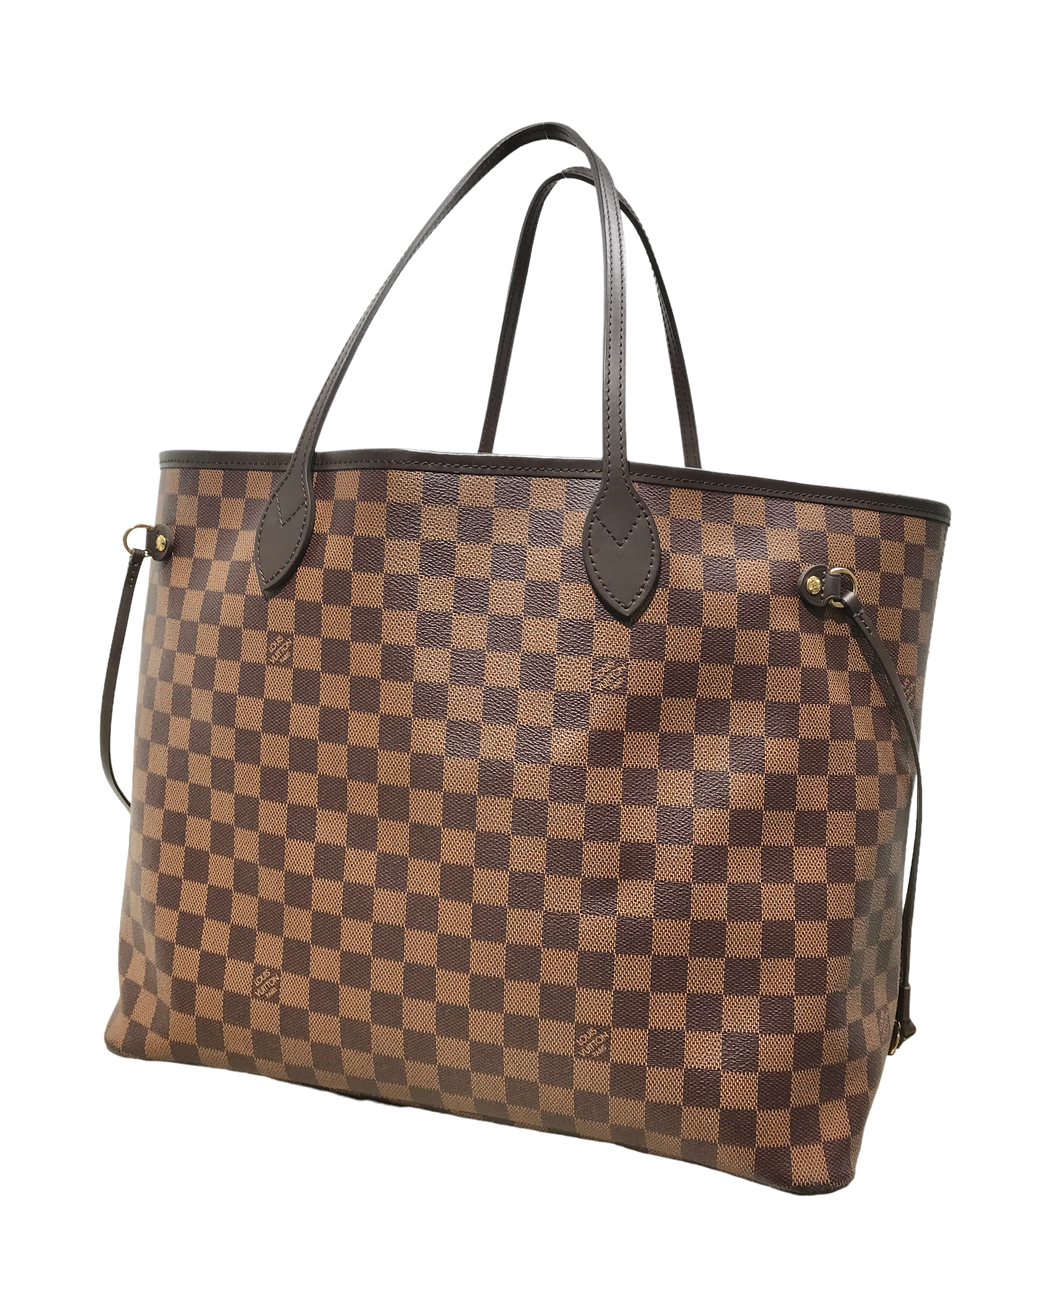 Authentic USED Louis Vuitton Neverfull MM